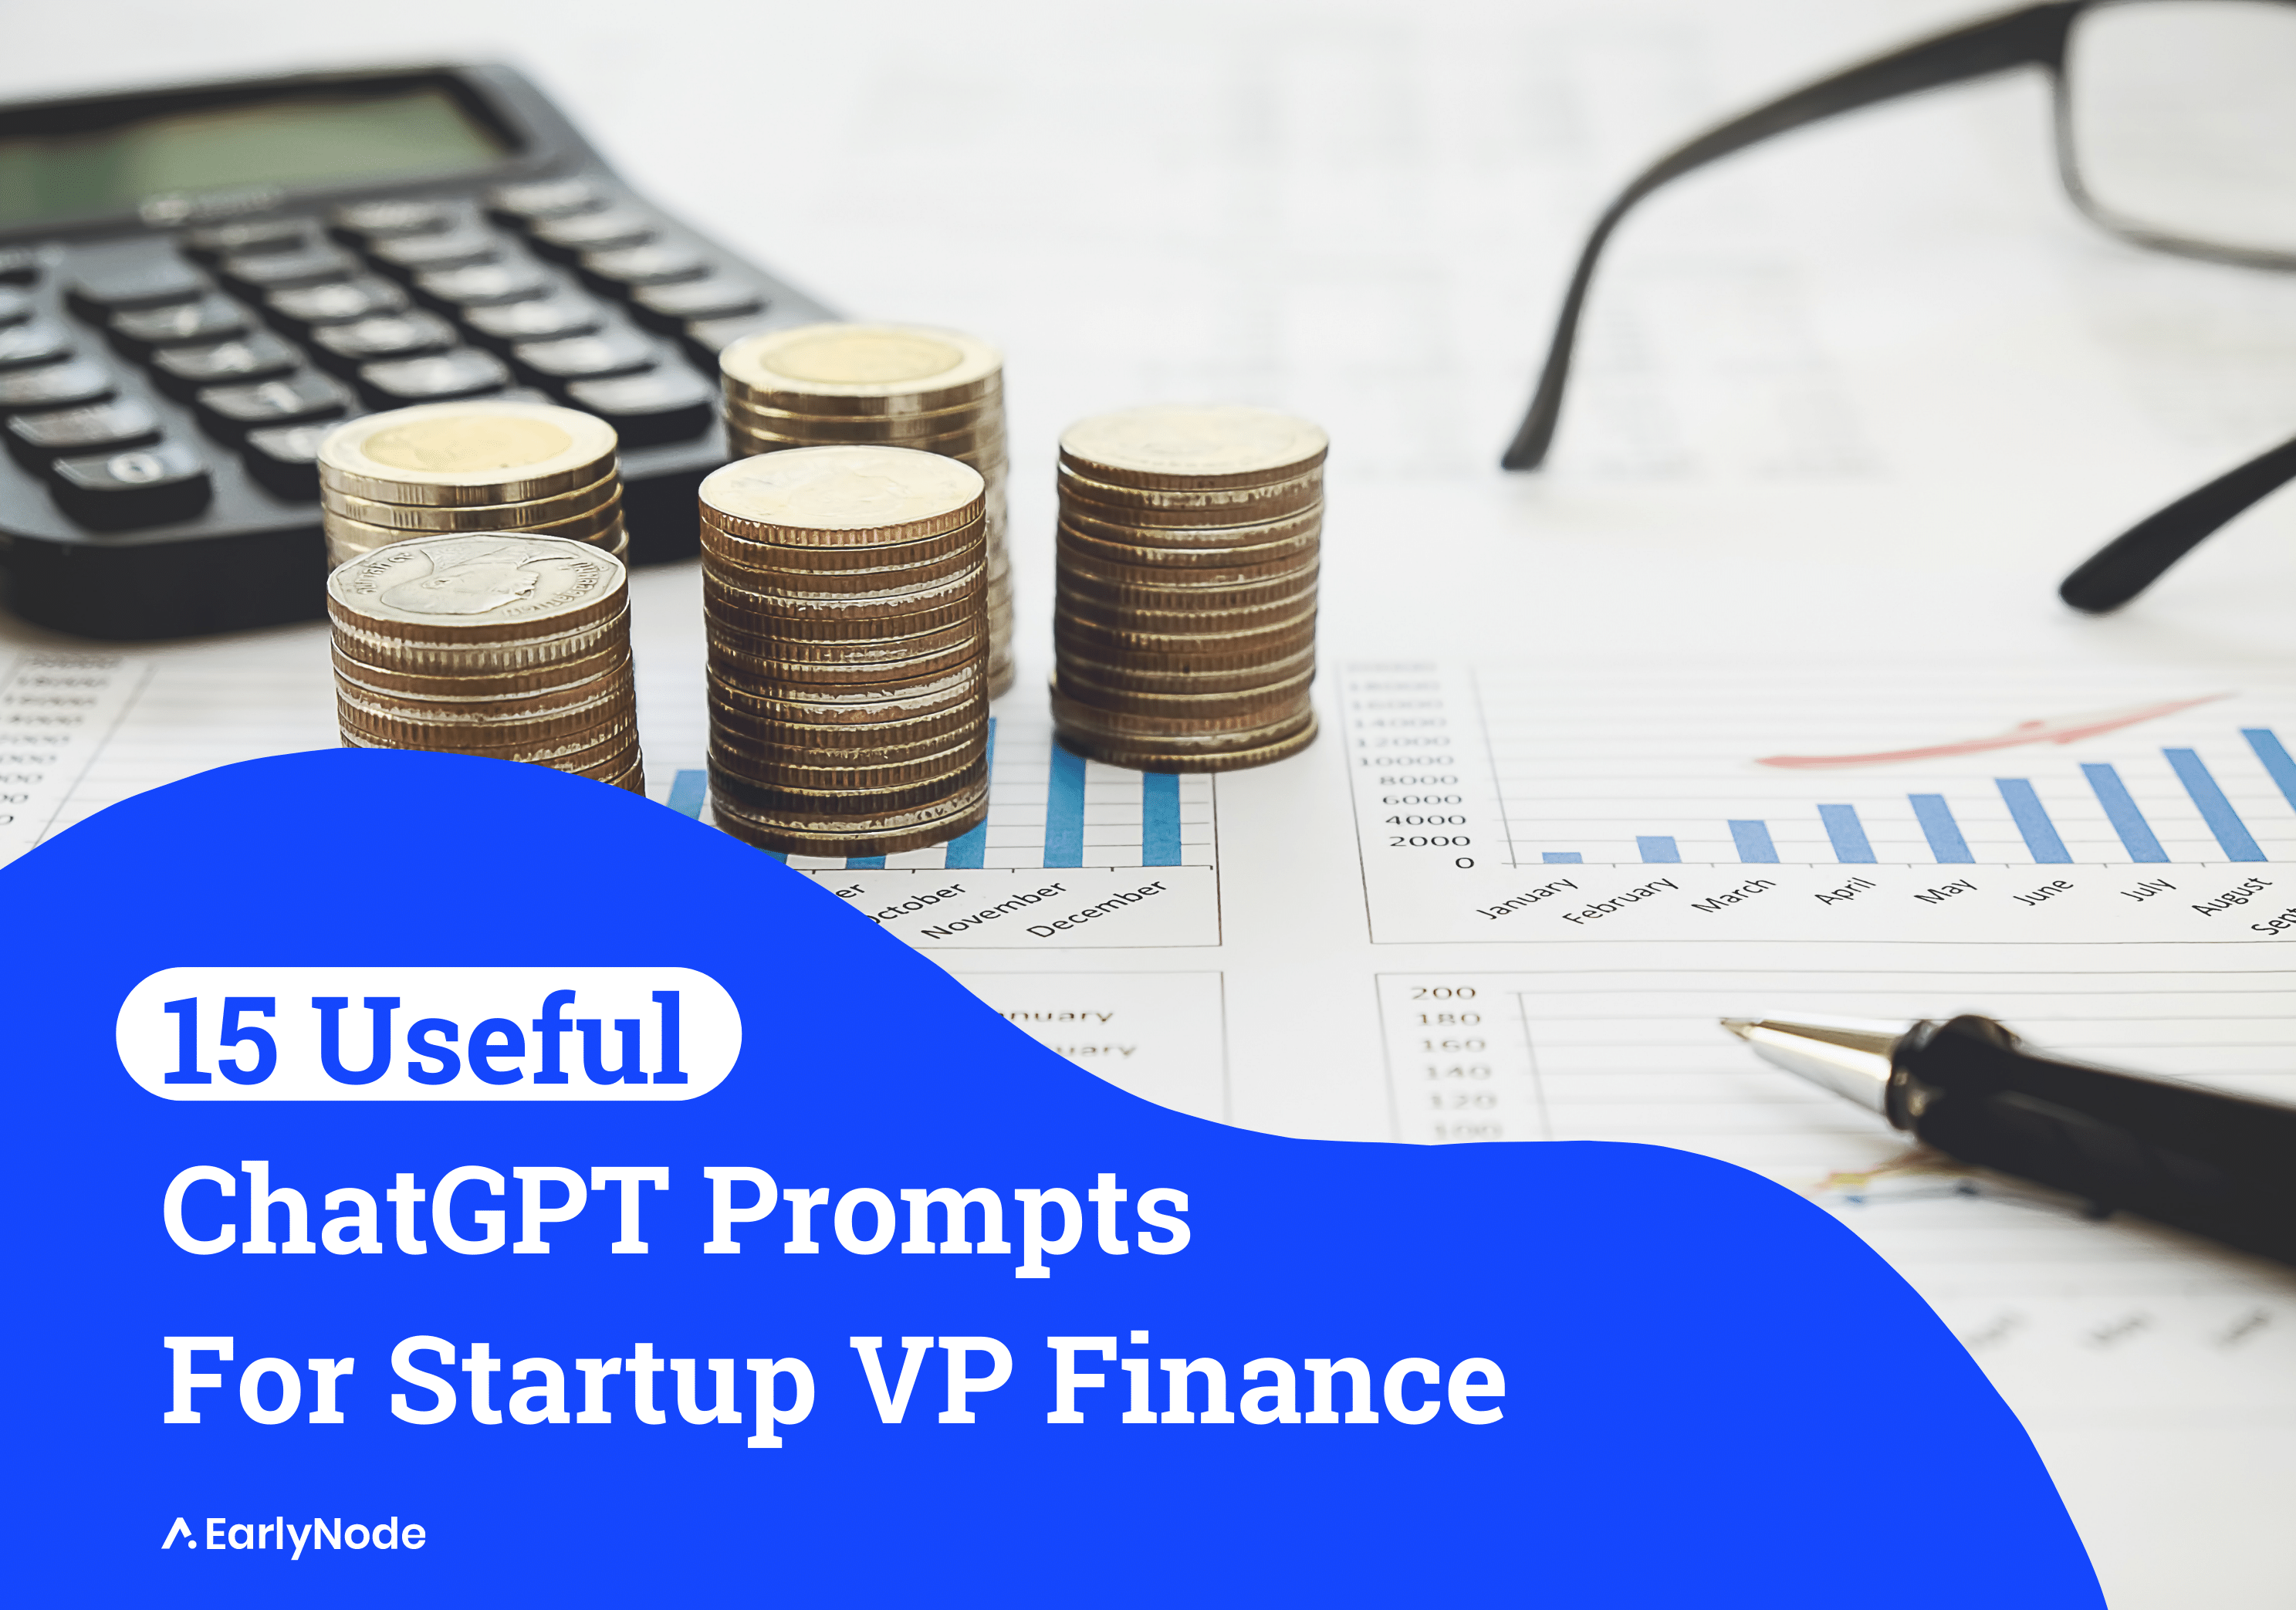 15 Tailored ChatGPT Prompts For VP Finance